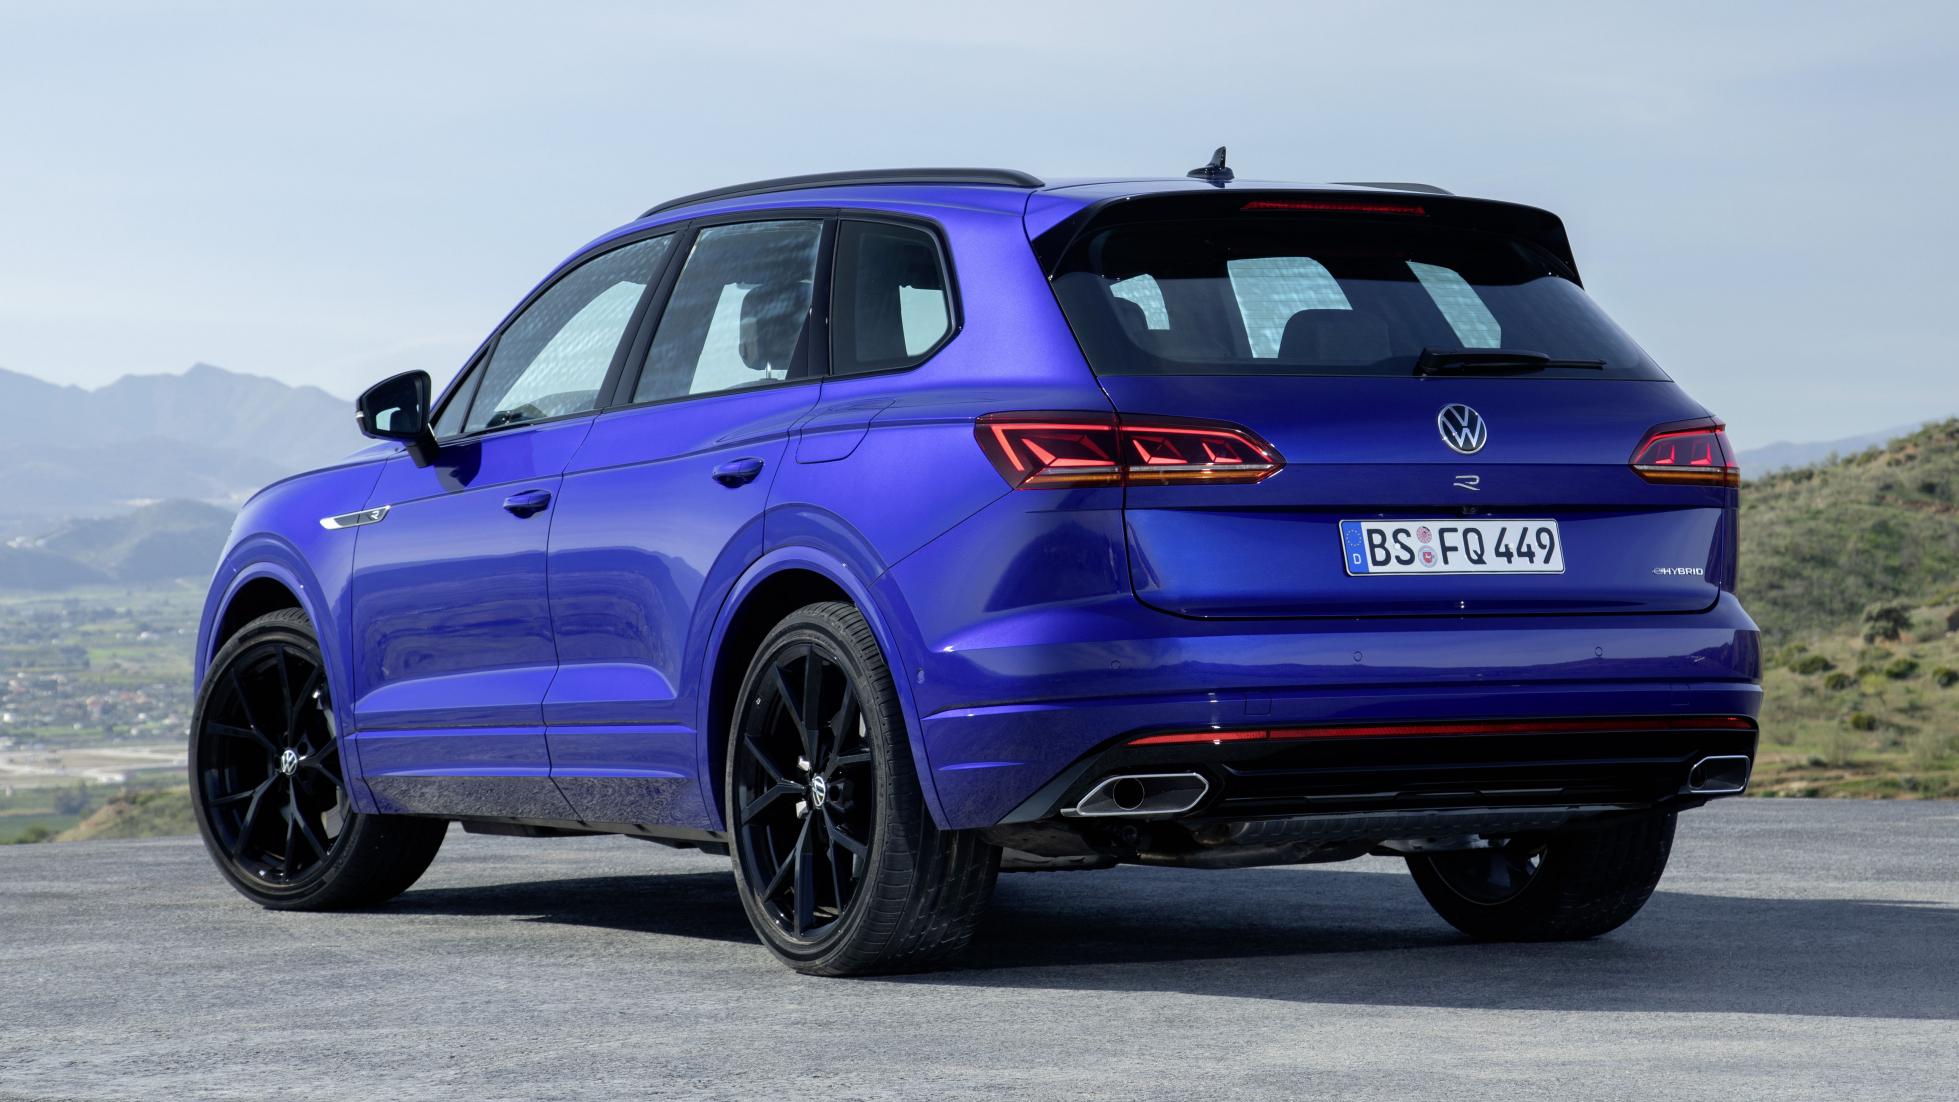 TopGear The new VW Touareg R is a 462hp hybrid SUV